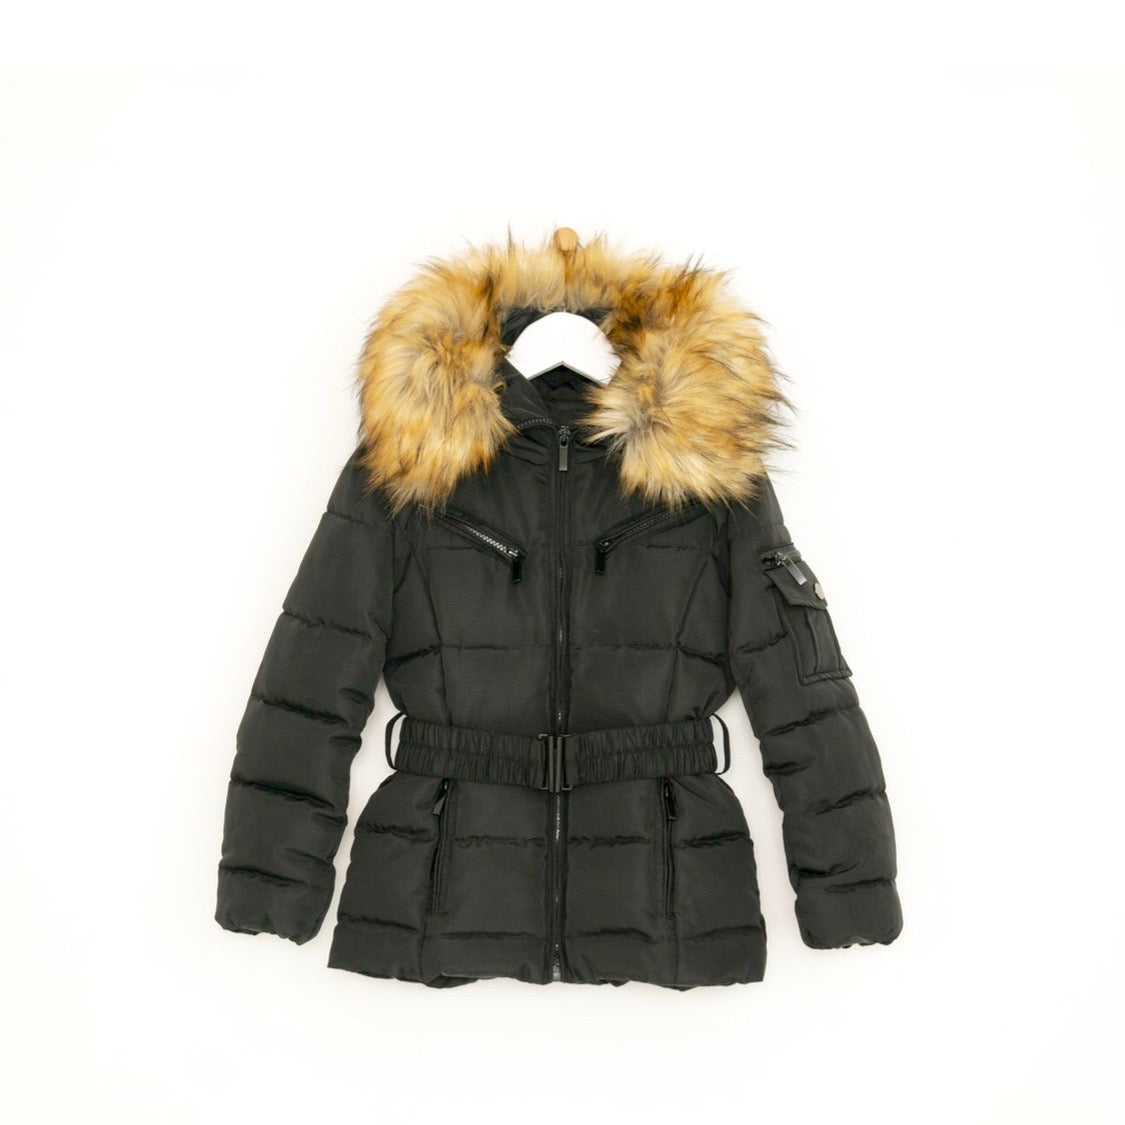 belted coat with fur hood